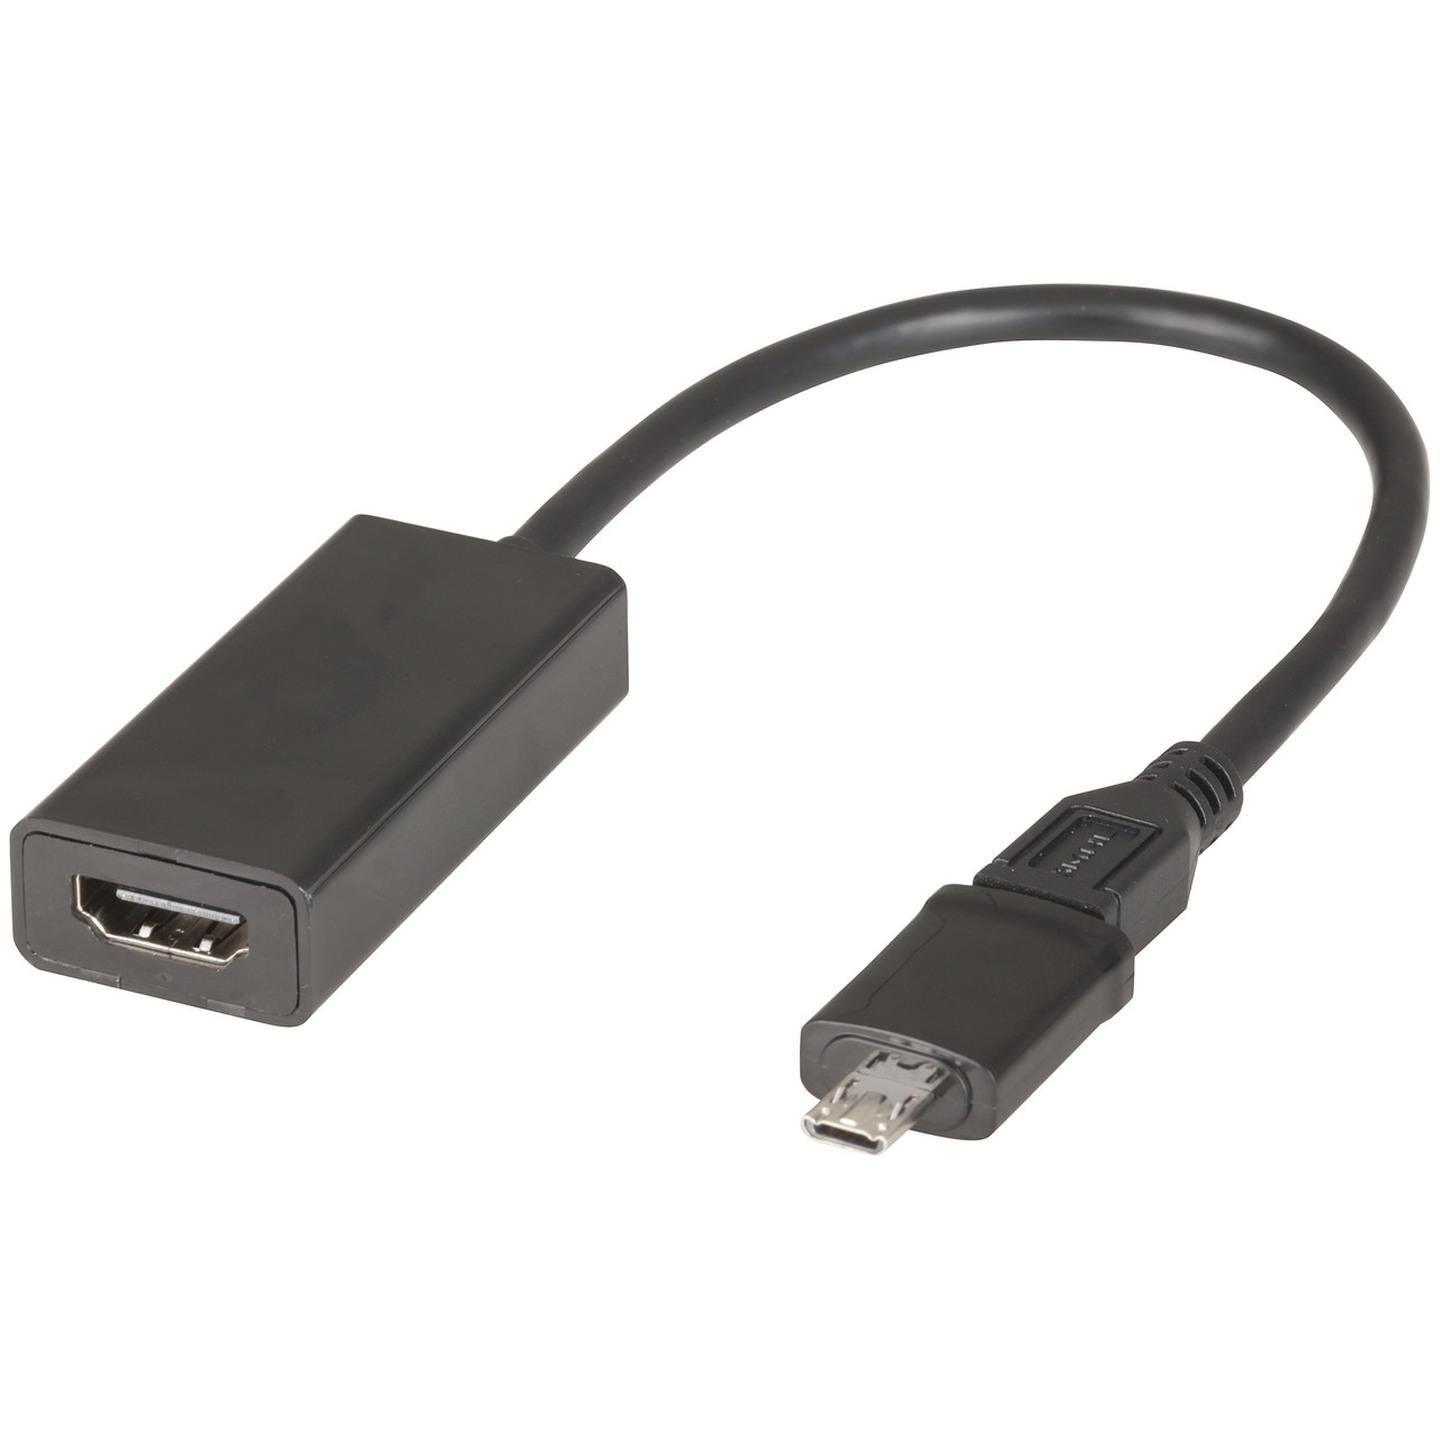 MHL to HDMI Converter with 11 Pin Samsung Adaptor